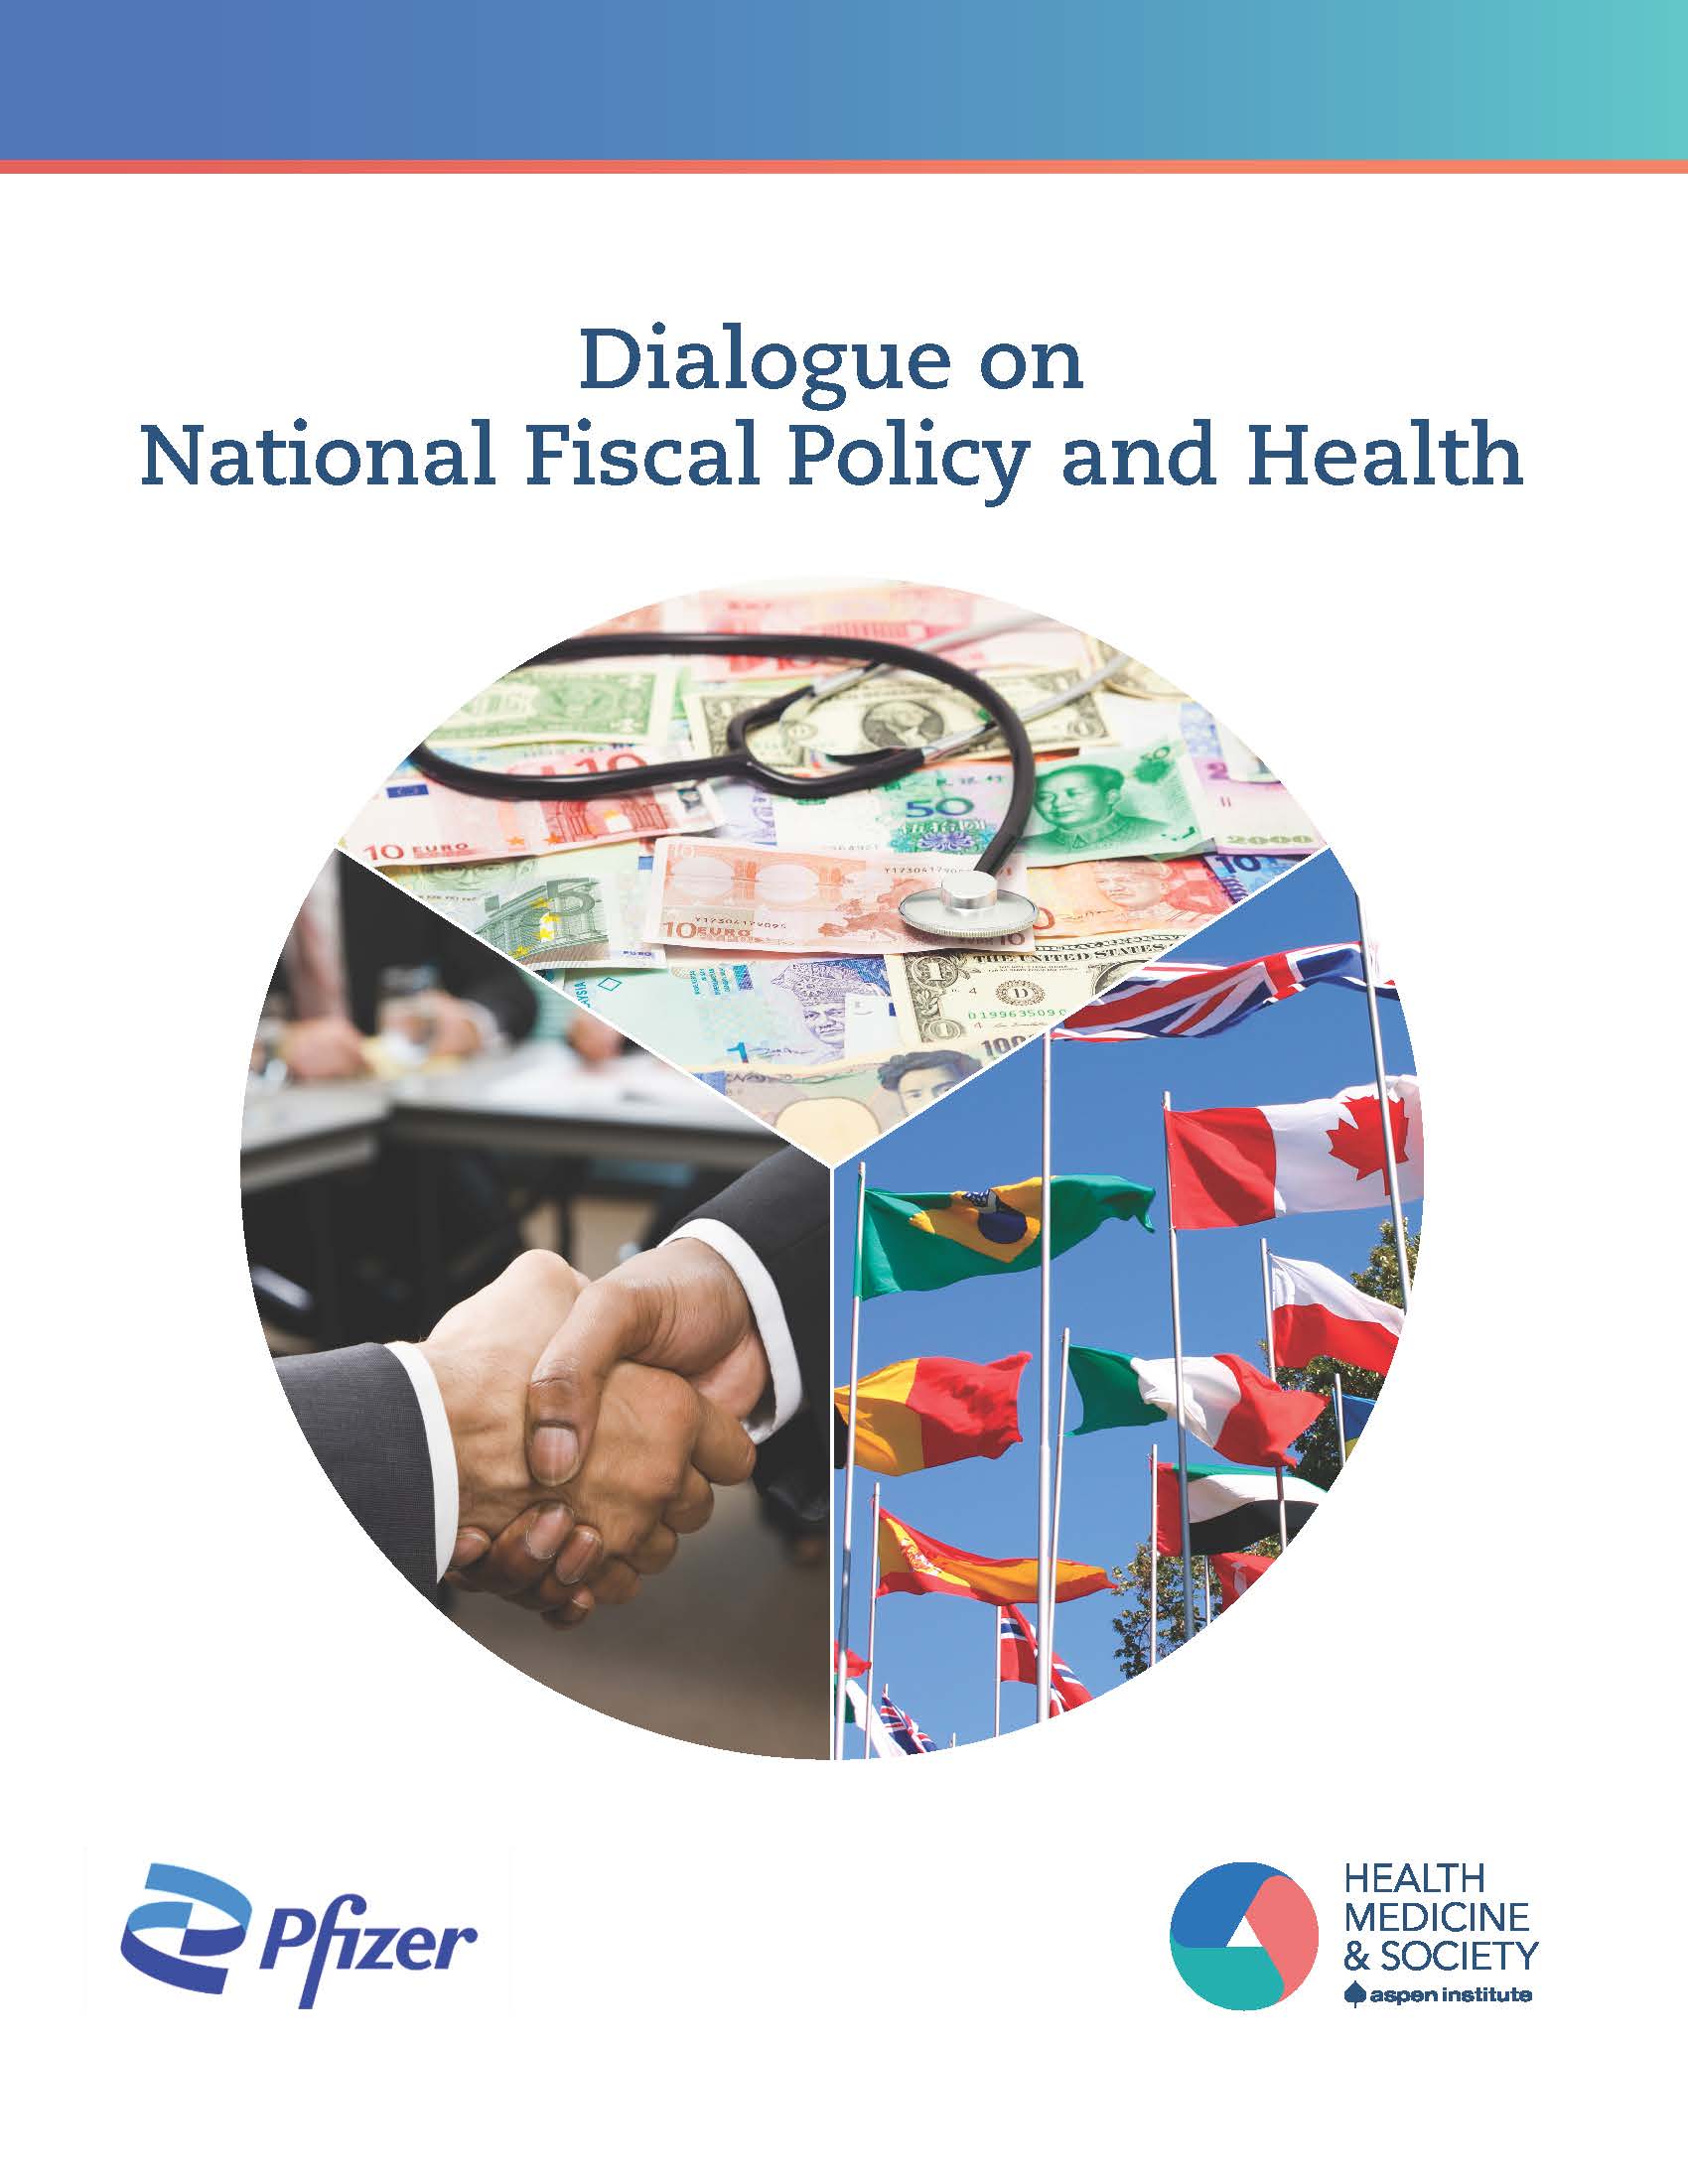 Dialogue on National Fiscal Policy and Health